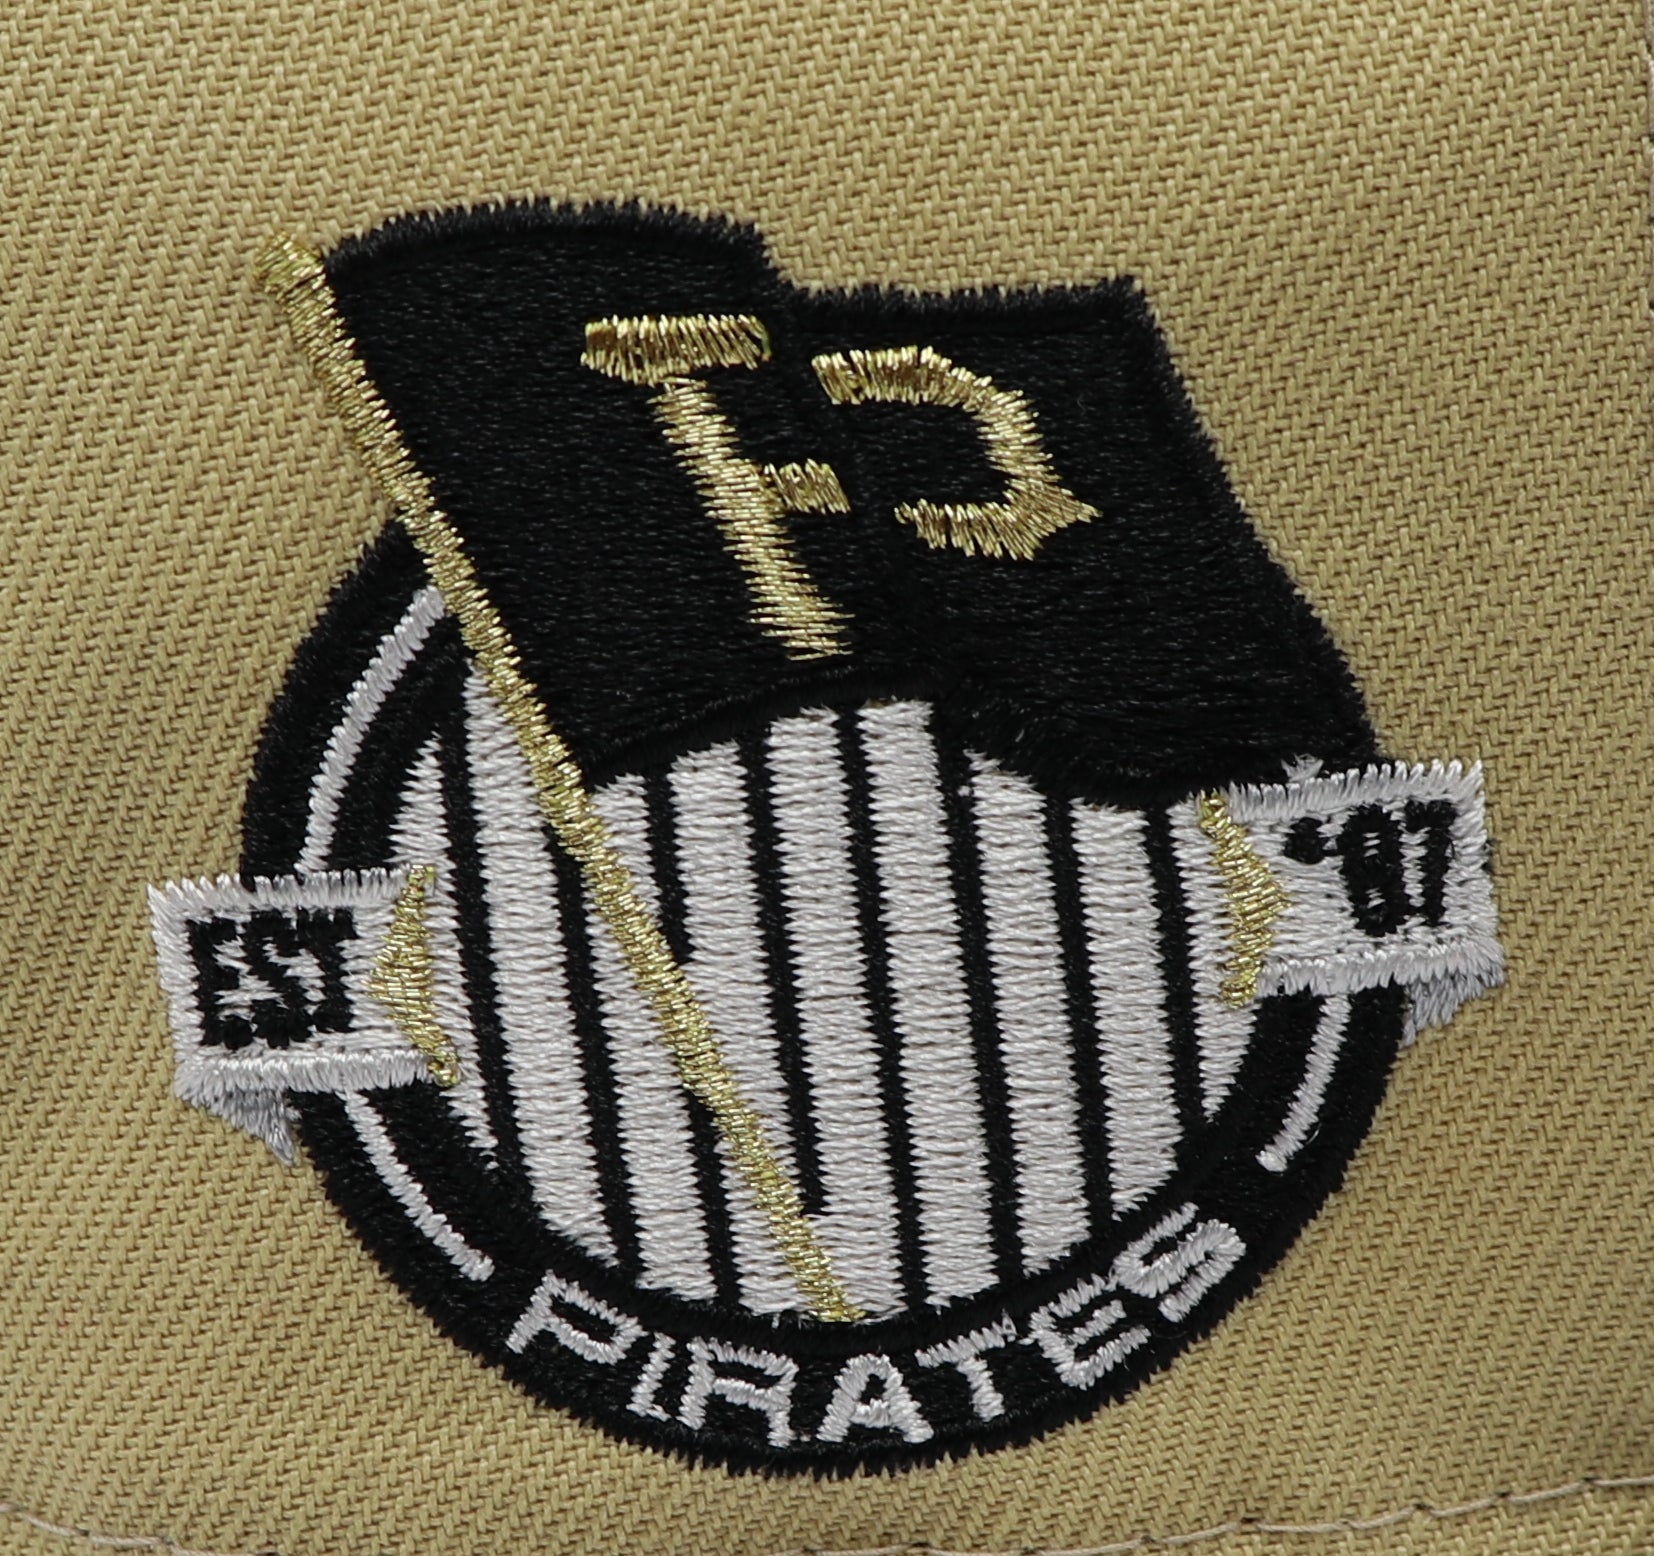 PITTSBURGH PIRATES (V-GOLD) NEW ERA 59FIFTY FITTED (OFF-WHITE UNDER VISOR)